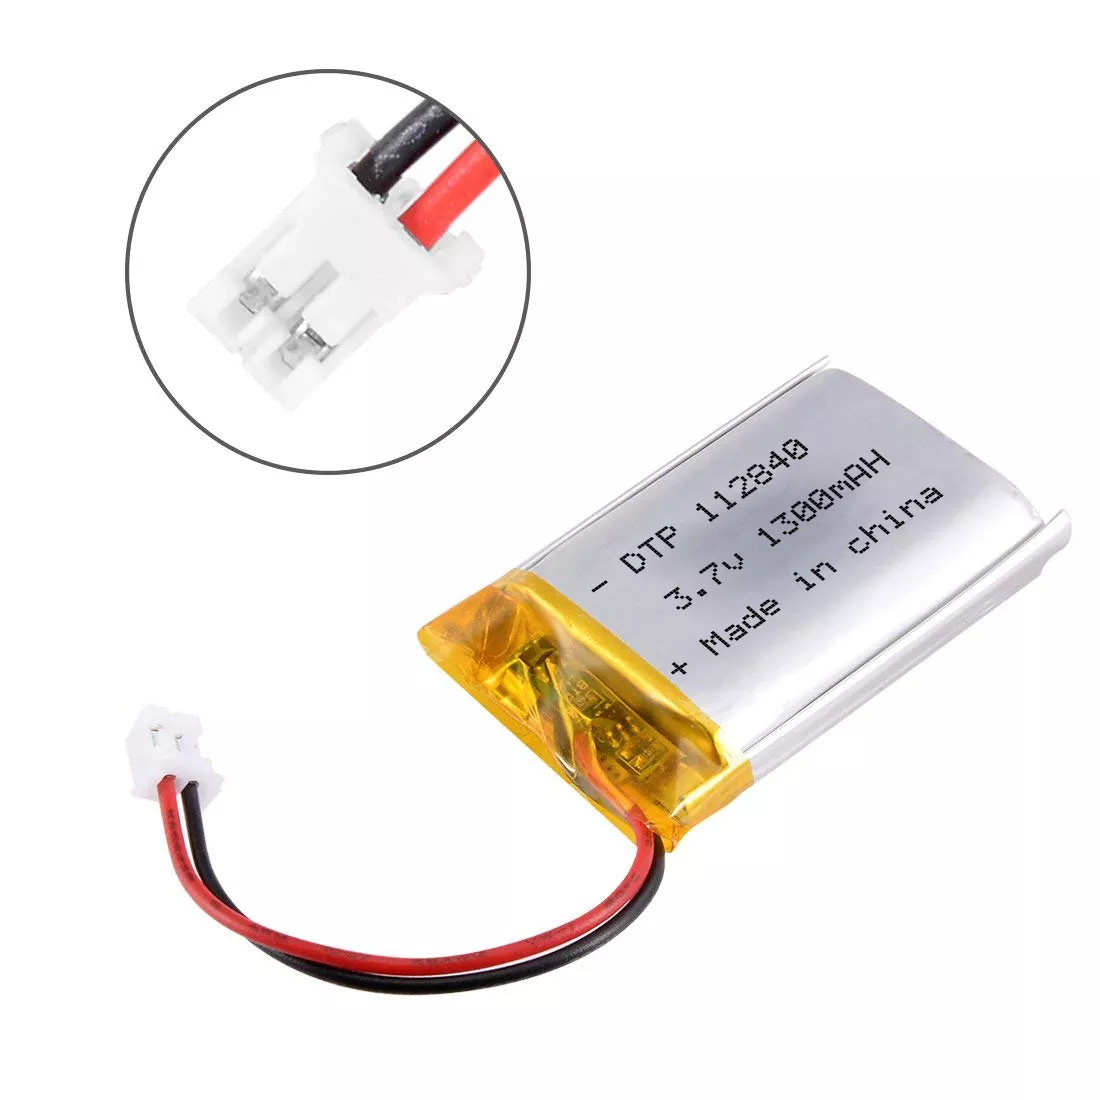 Rechargeable lithium ion battery DTP 112840 1300mah 3.7v li polymer battery for electronic equipment